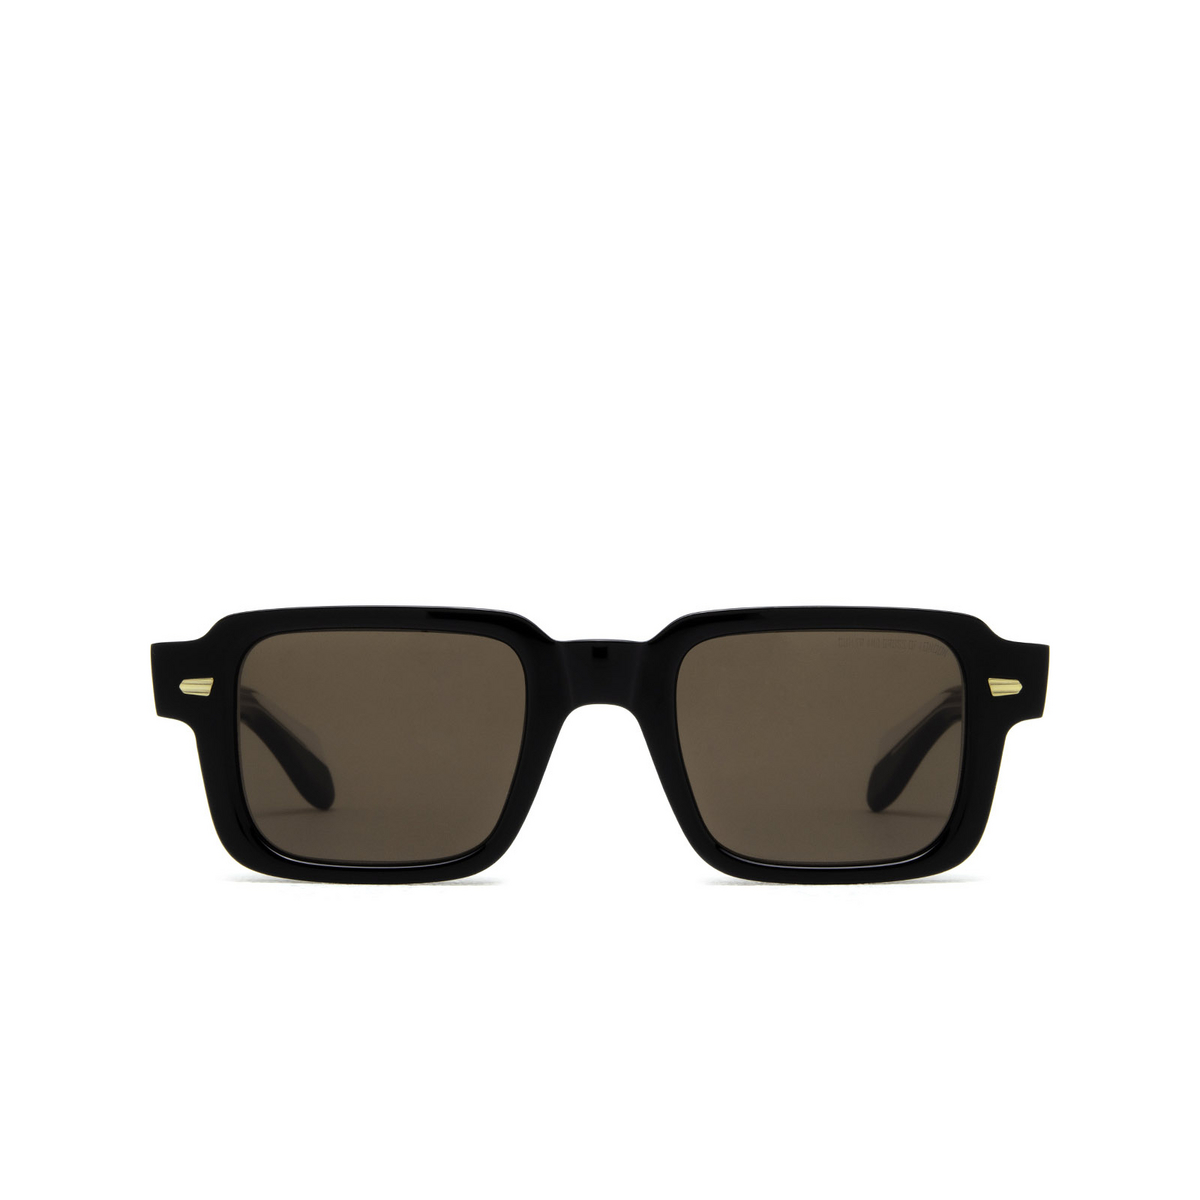 Cutler and Gross 1393 Sunglasses 01 Black - front view